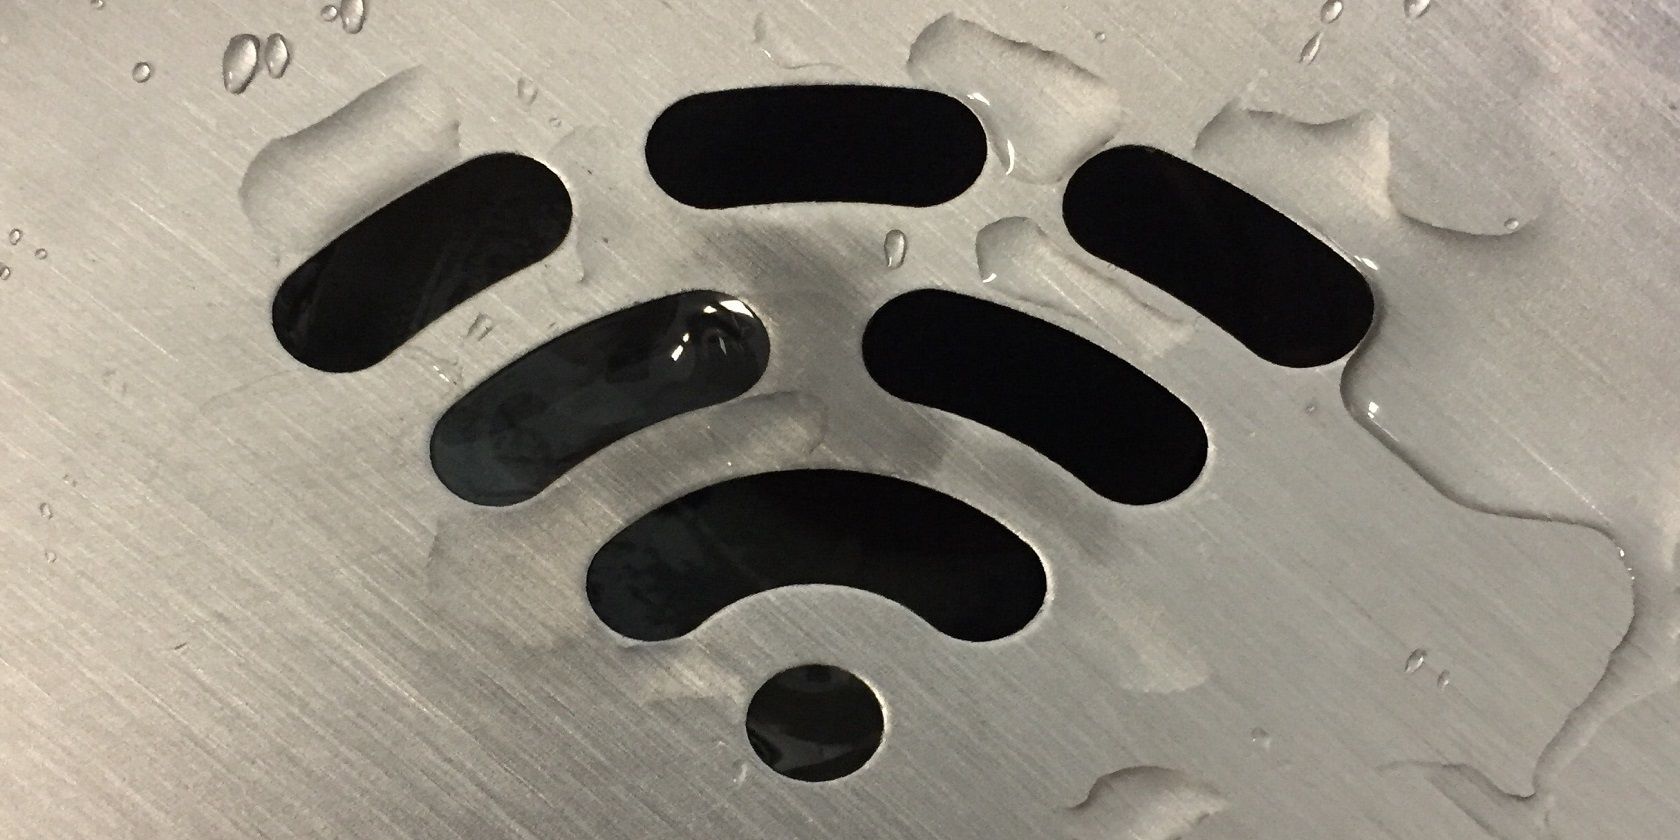 WIFI symbol with some water droplets